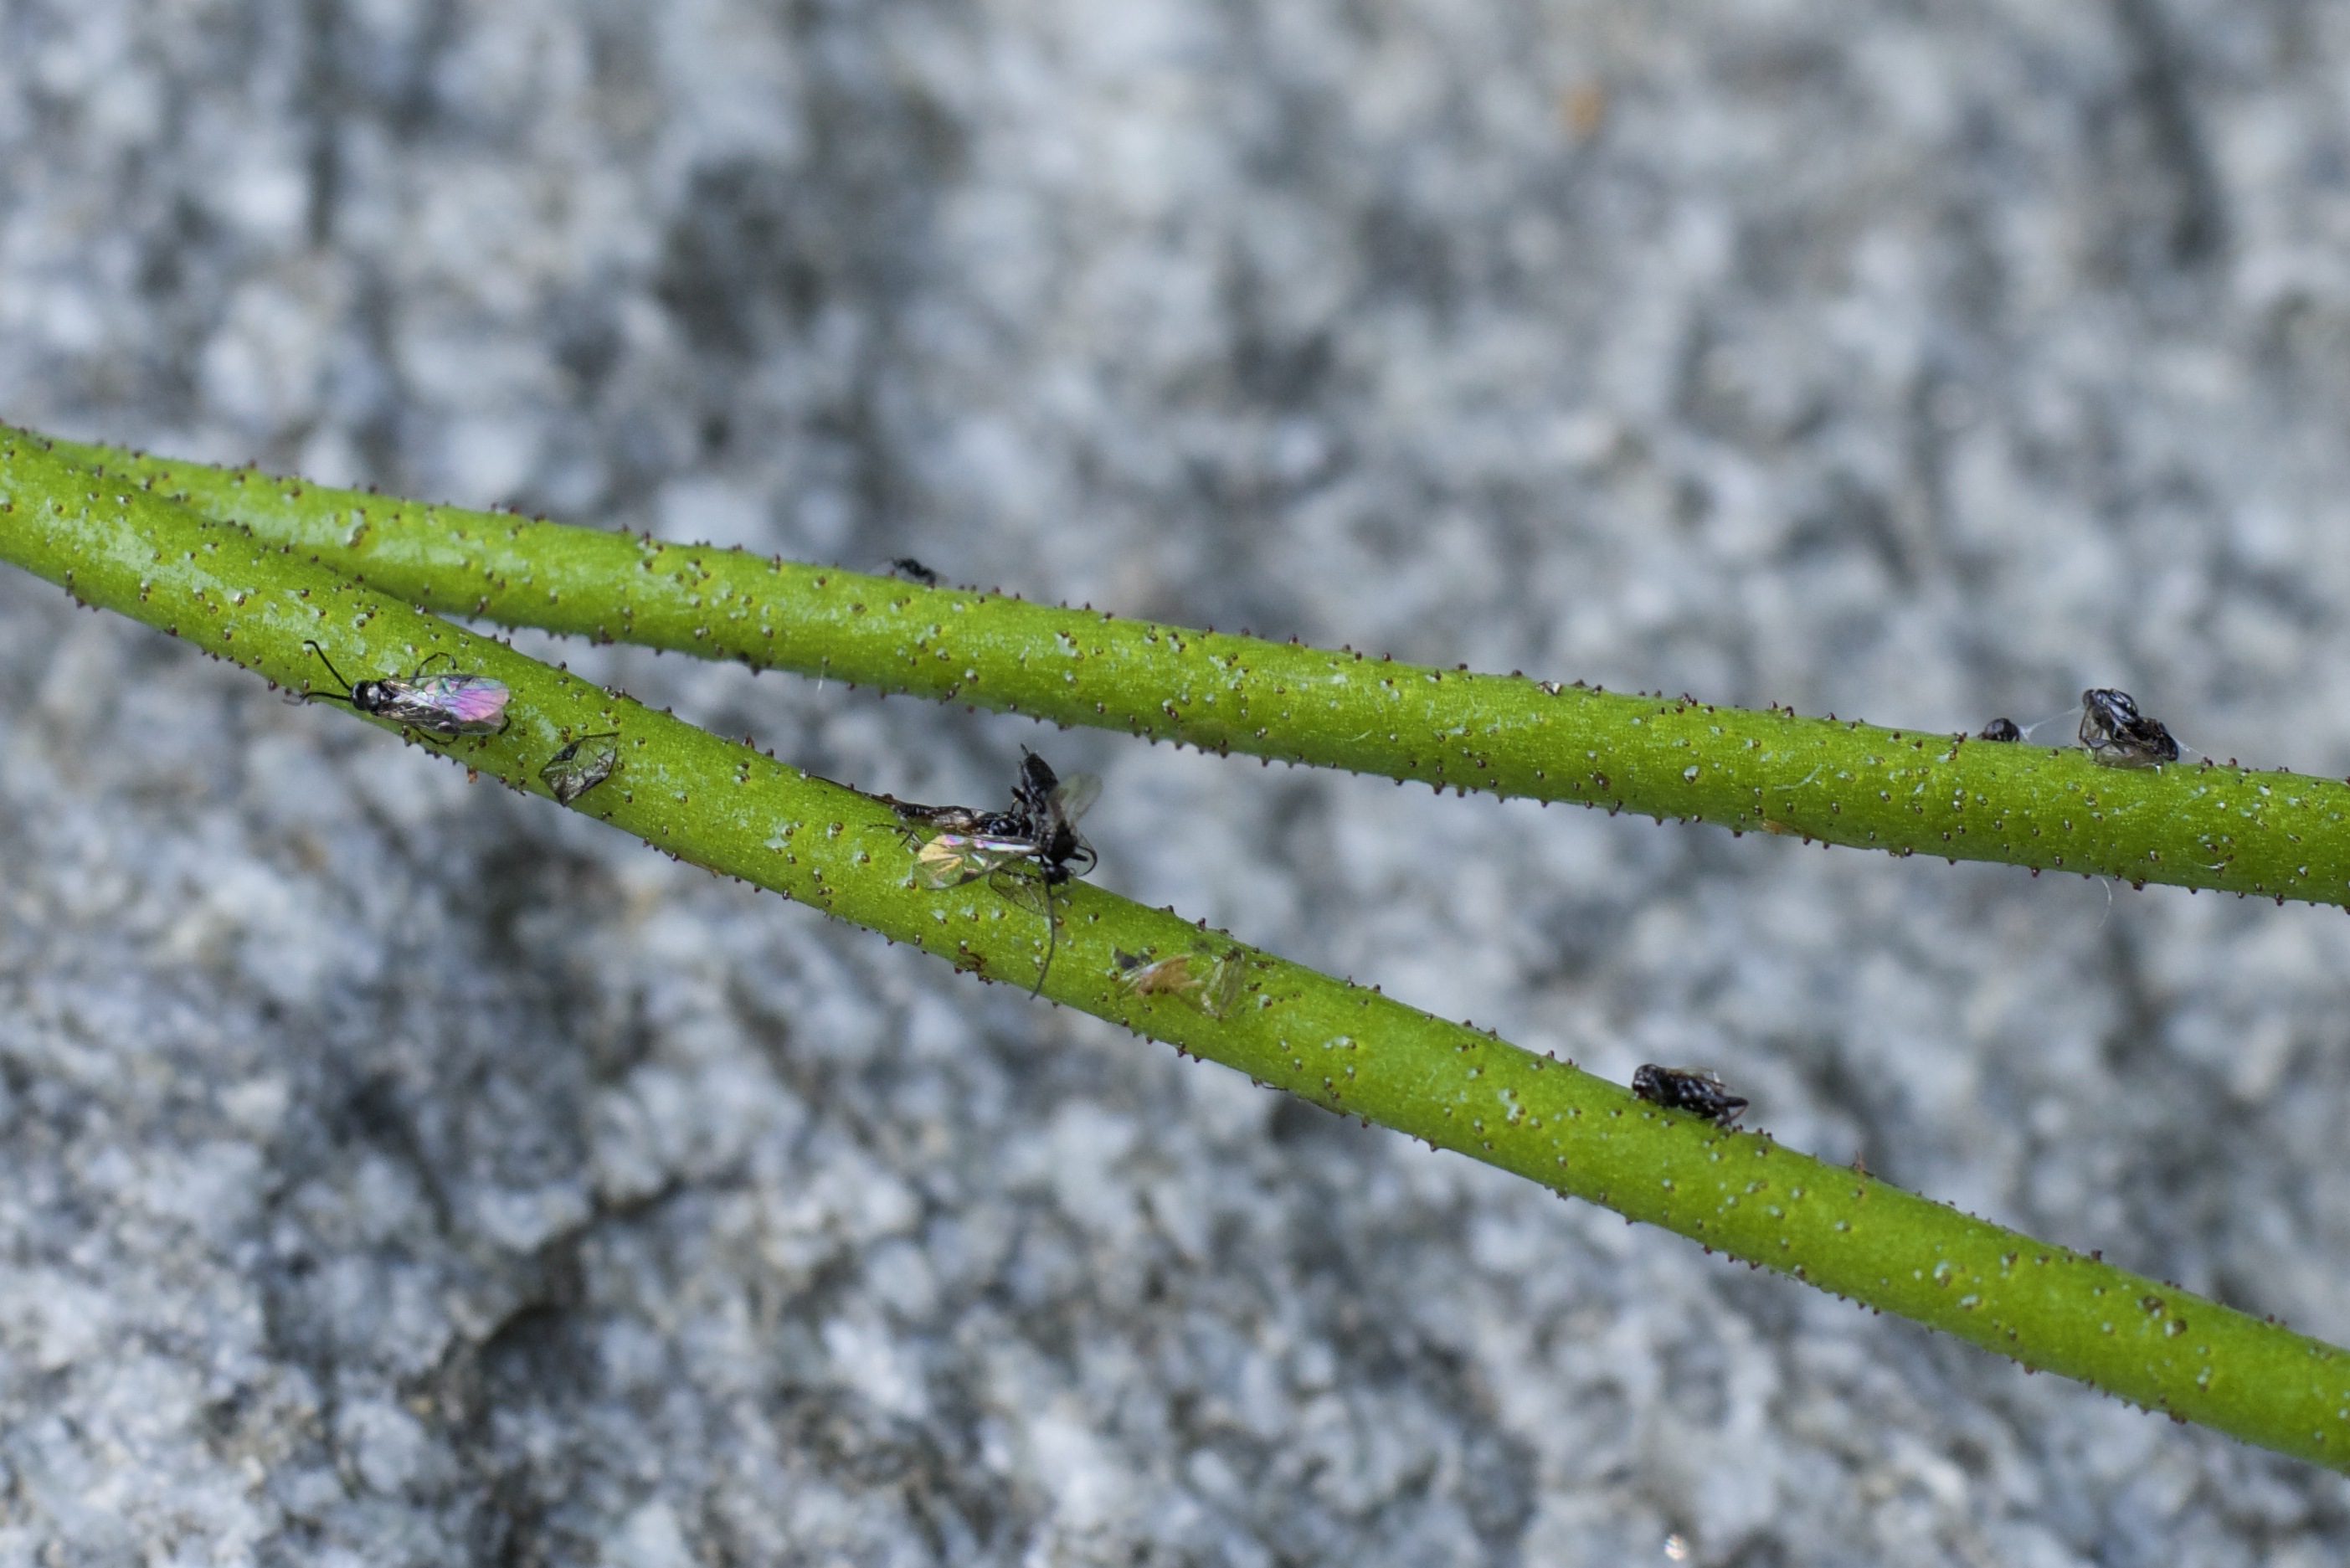 Fresh field specimens are put on a stem of the plant.